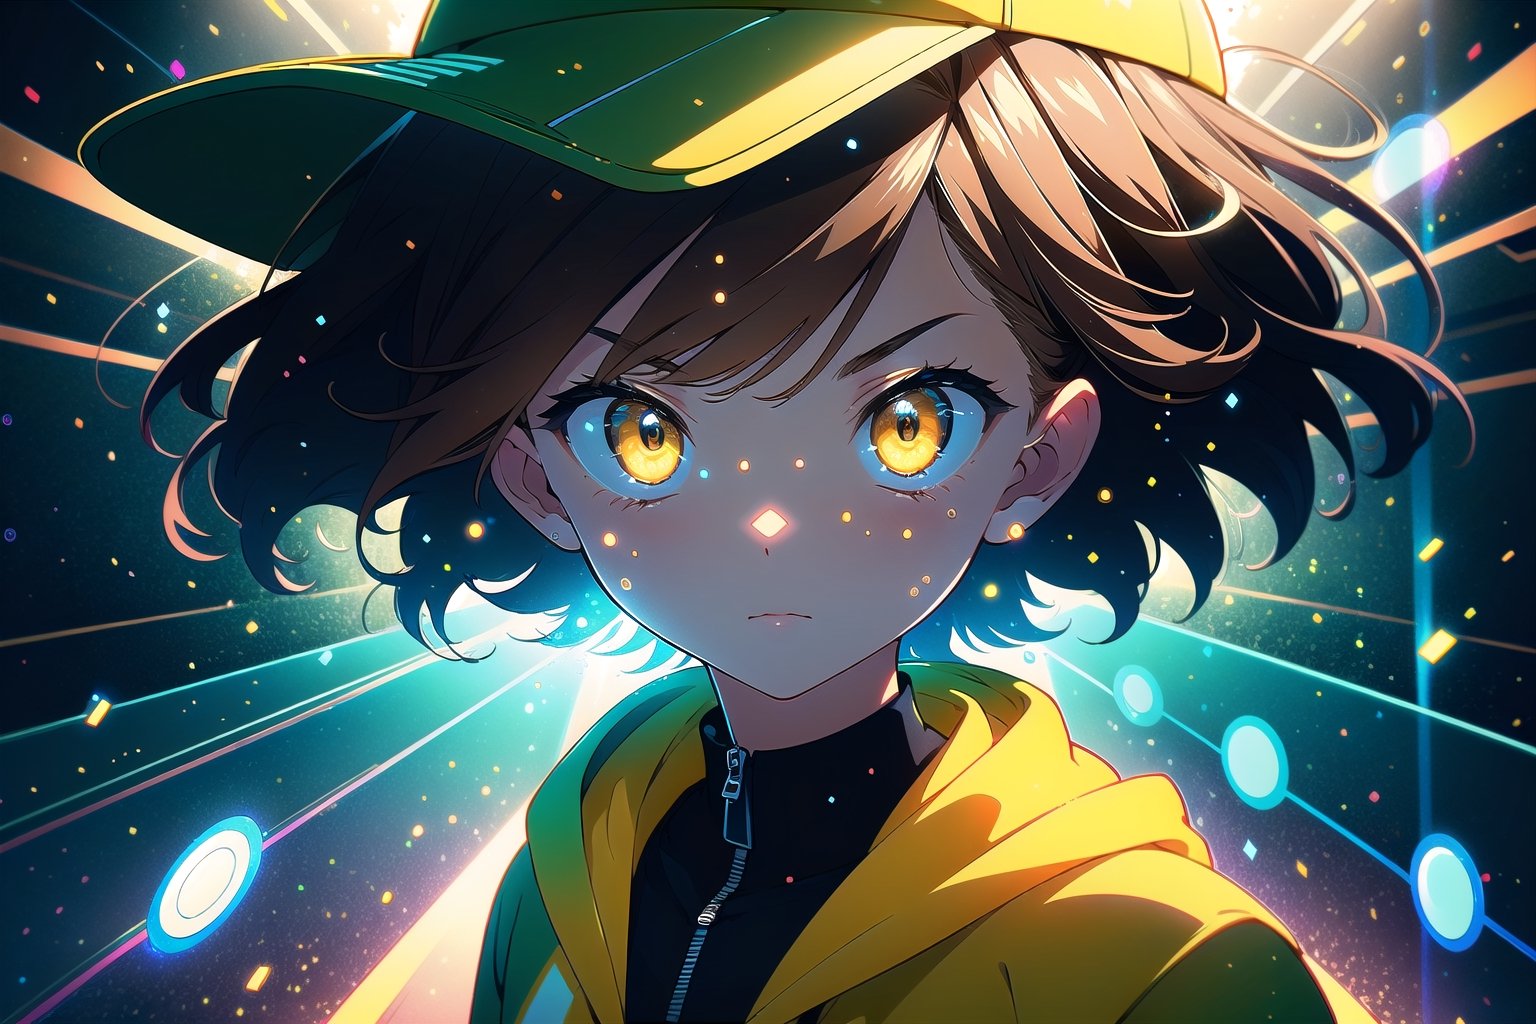 (masterpiece),  1 girl, teen, light brown eyes, brown hair, strong wind, scared face, yellow unzipped yellow hoodie by wind, topless behaind the hoodie, yellow cap, shorts, CFI, science fiction,  magic circles,  light blue particles,  light rays,  futuristic exterior, holographic interface,portrait,illustration, 3/4 close-up, Landing pose, downloading holographic, epic footage, UFO light spectrum 